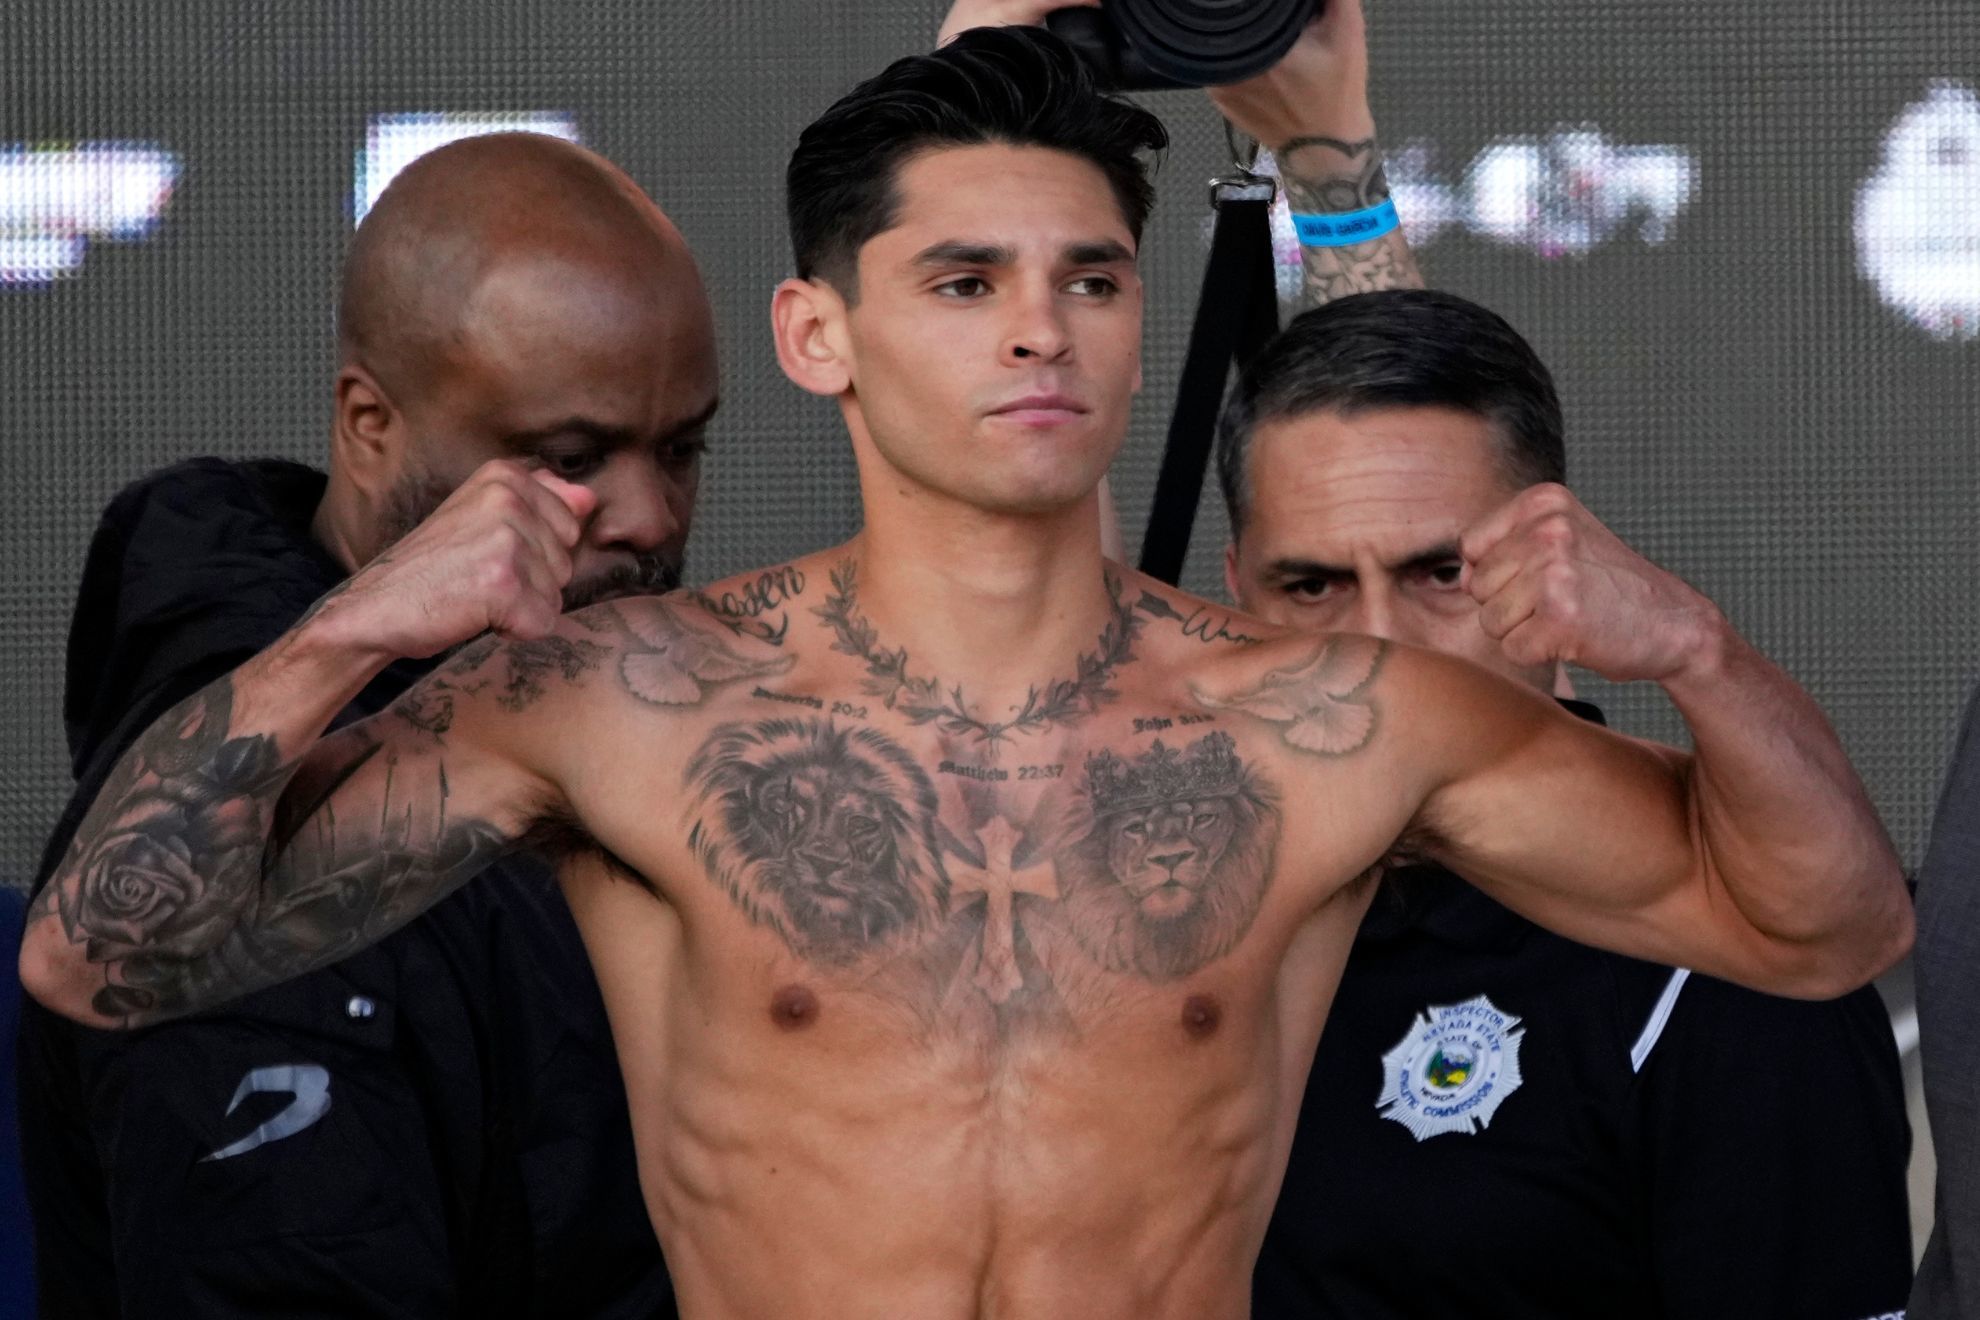 Ryan Garcia names his body parts that are off limits when it comes to tattoos